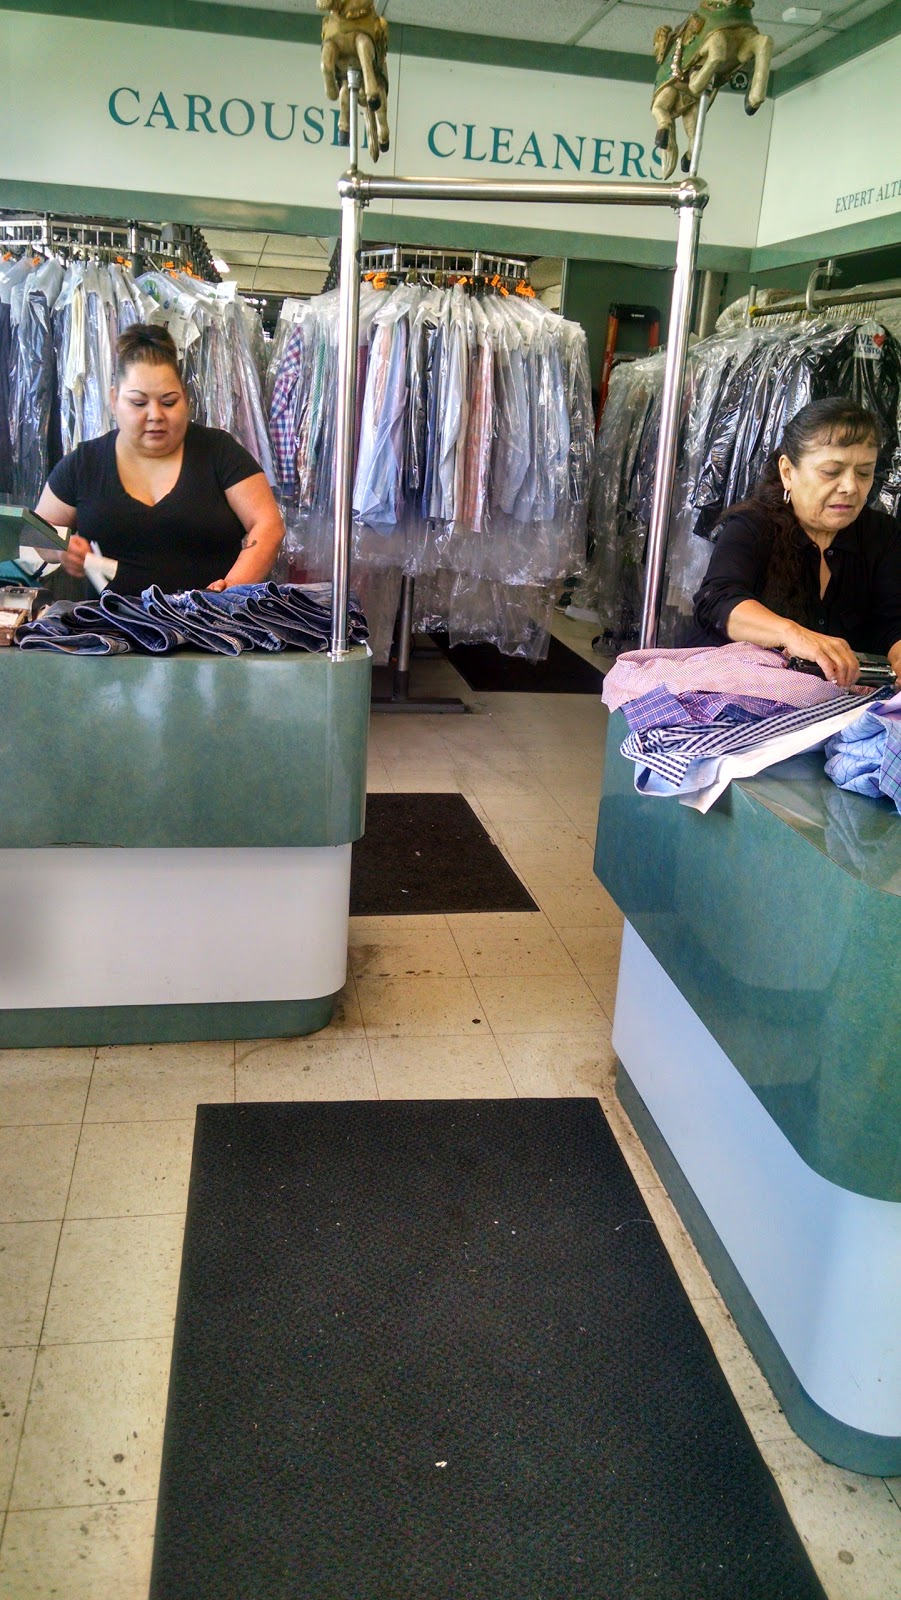 Carousel Cleaners | 4040 W 38th Ave, Denver, CO 80212, USA | Phone: (303) 477-1001